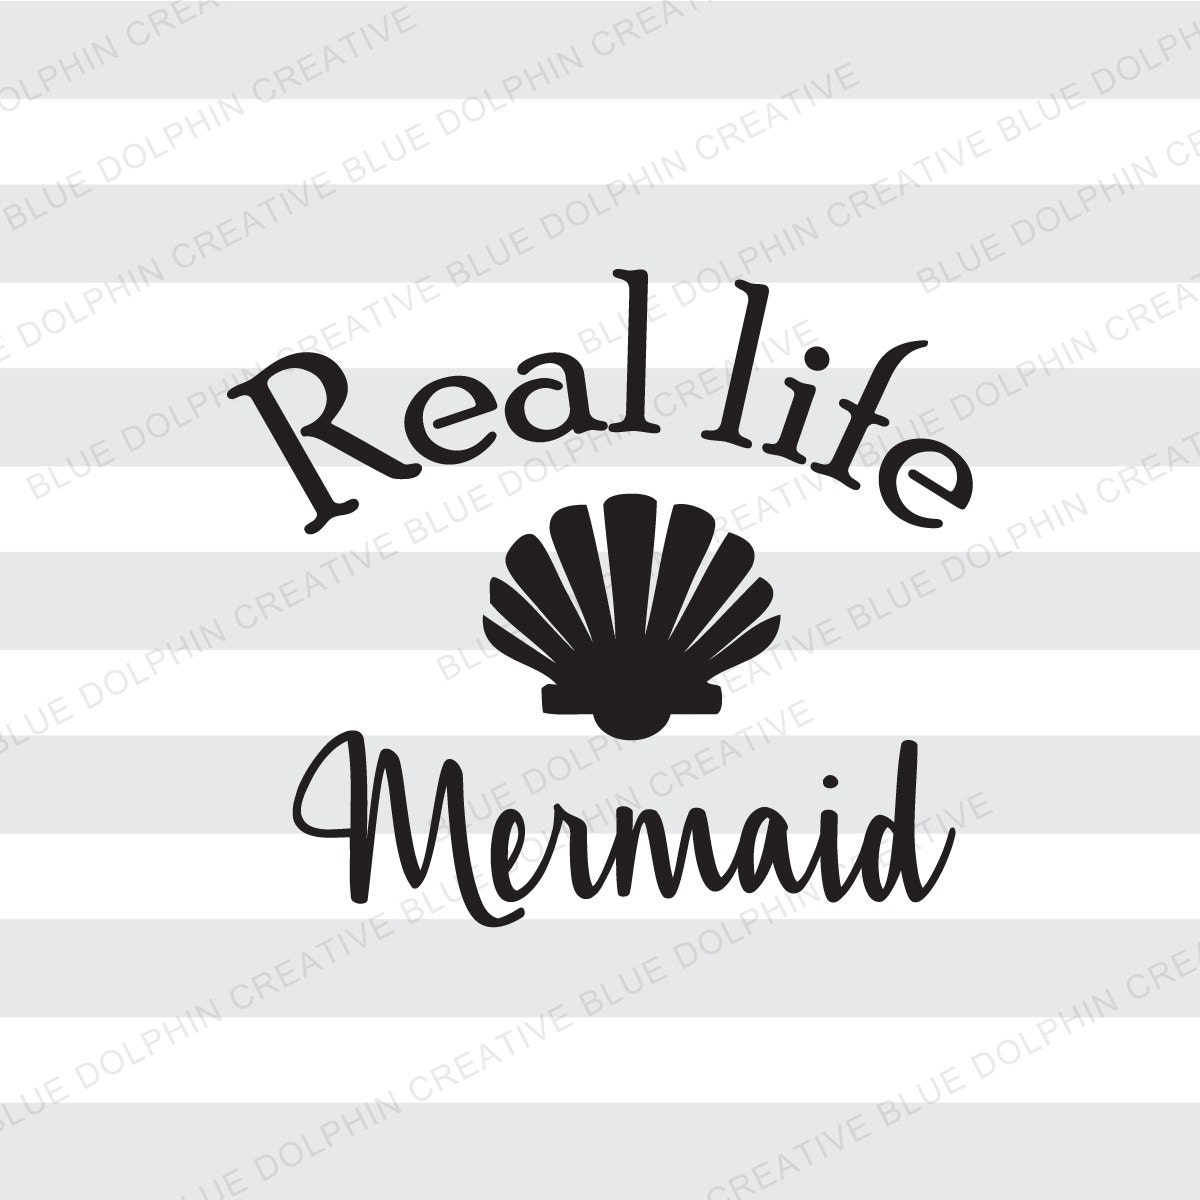 Download Real Life Mermaid SVG pdf png / electronic cutter files